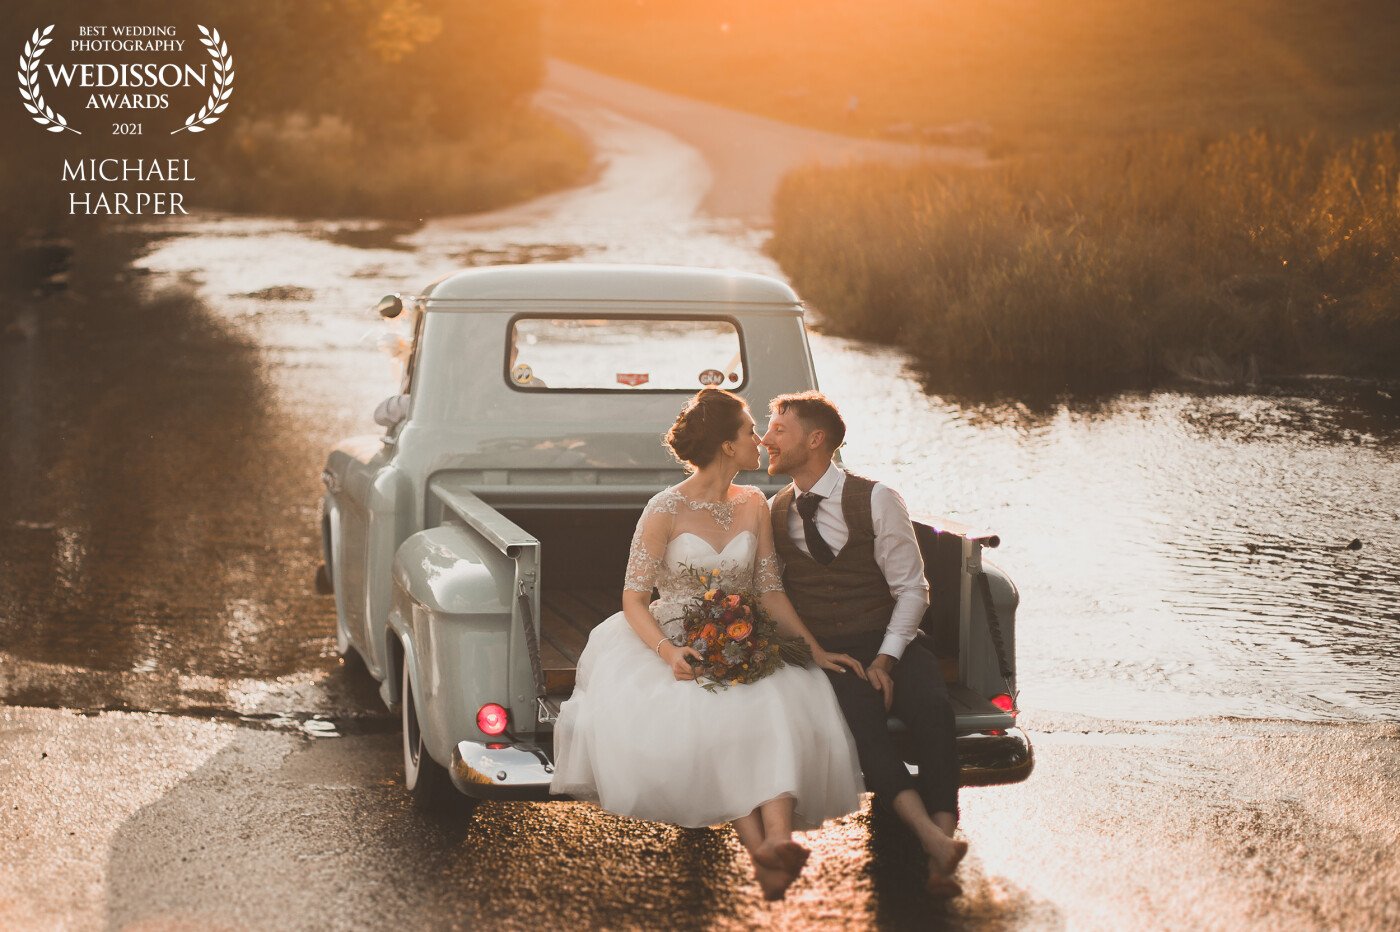 A country Tepee wedding that finished with some sunset couple shots. The last scene was slowly driving through a shallow stream as the couple smiled and kissed on the back of the truck. All natural light and great fun!